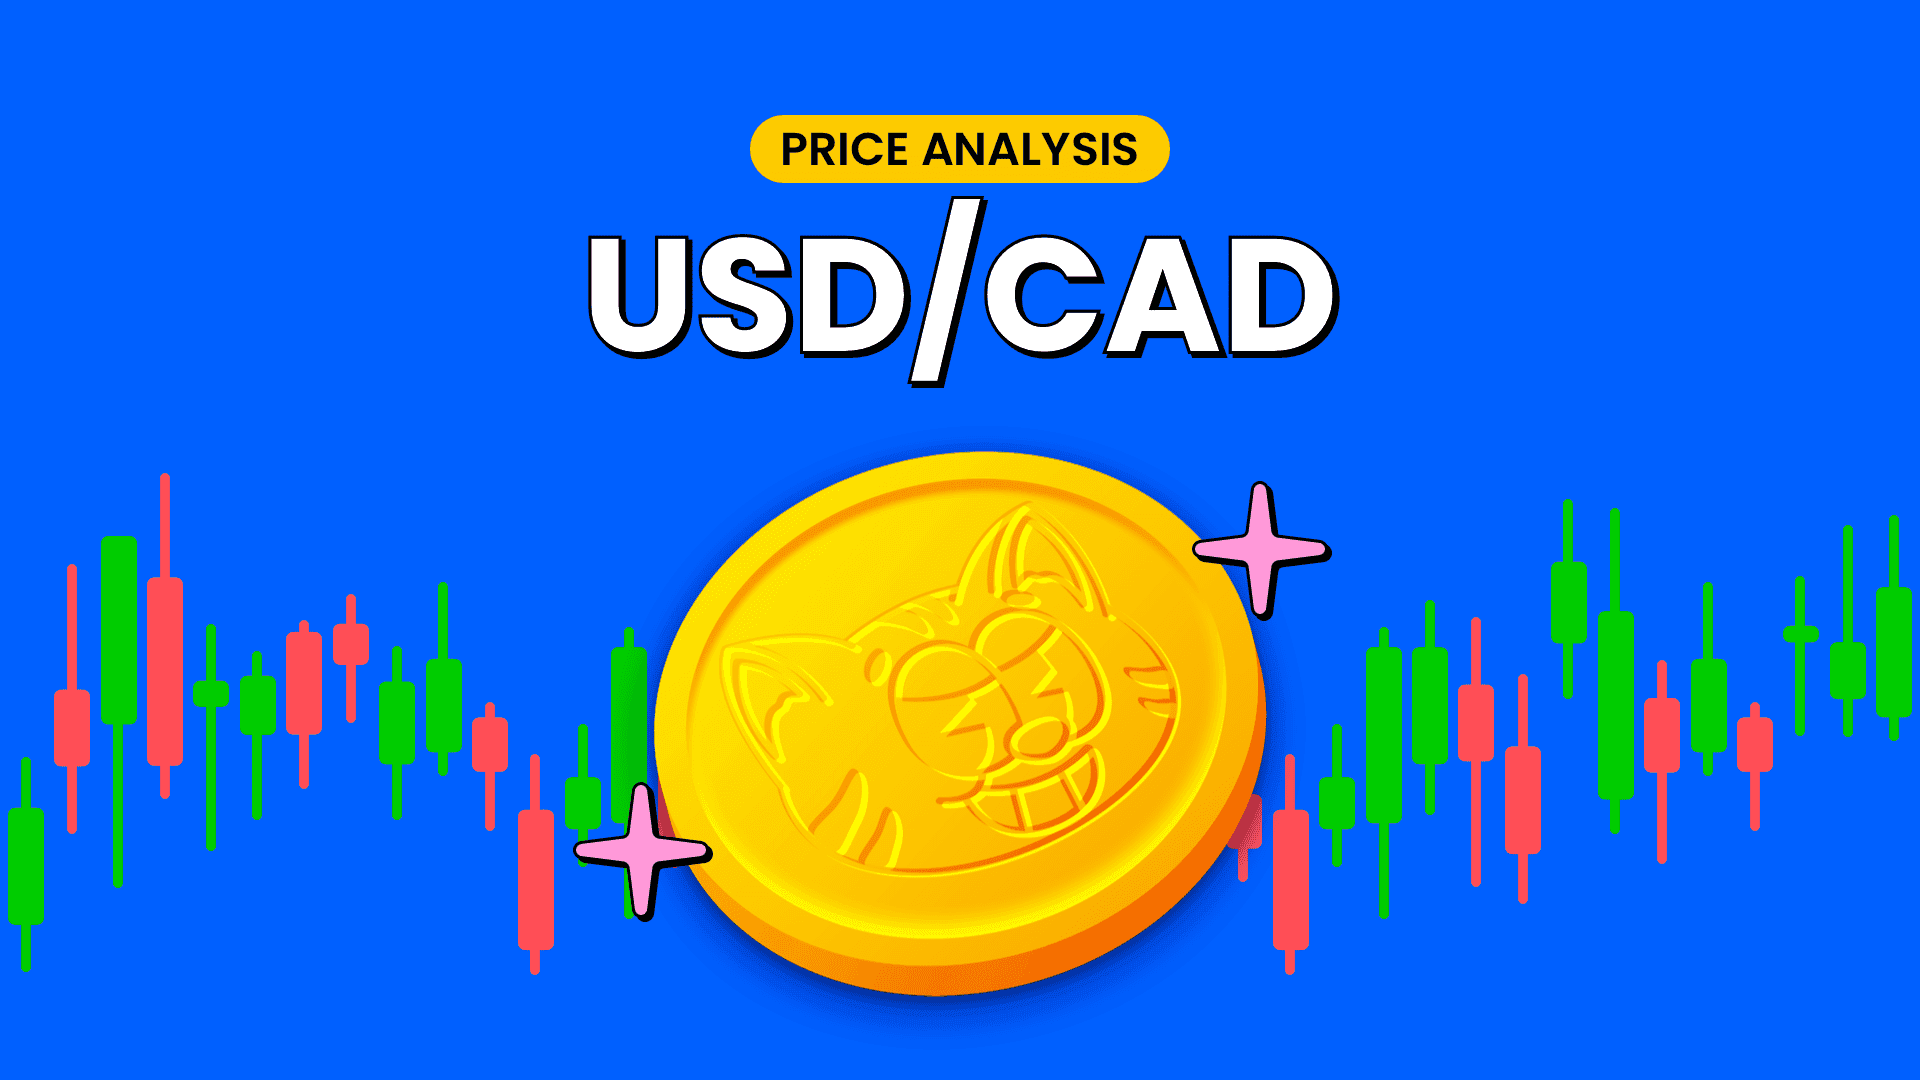 USDCAD-Seeks-To-Reclaim-Monthly-Peak-After-Hotter-Than-Expected-Inflation-Data-PPI-Data-On-Sight-Feature-Image-3yJLO.png